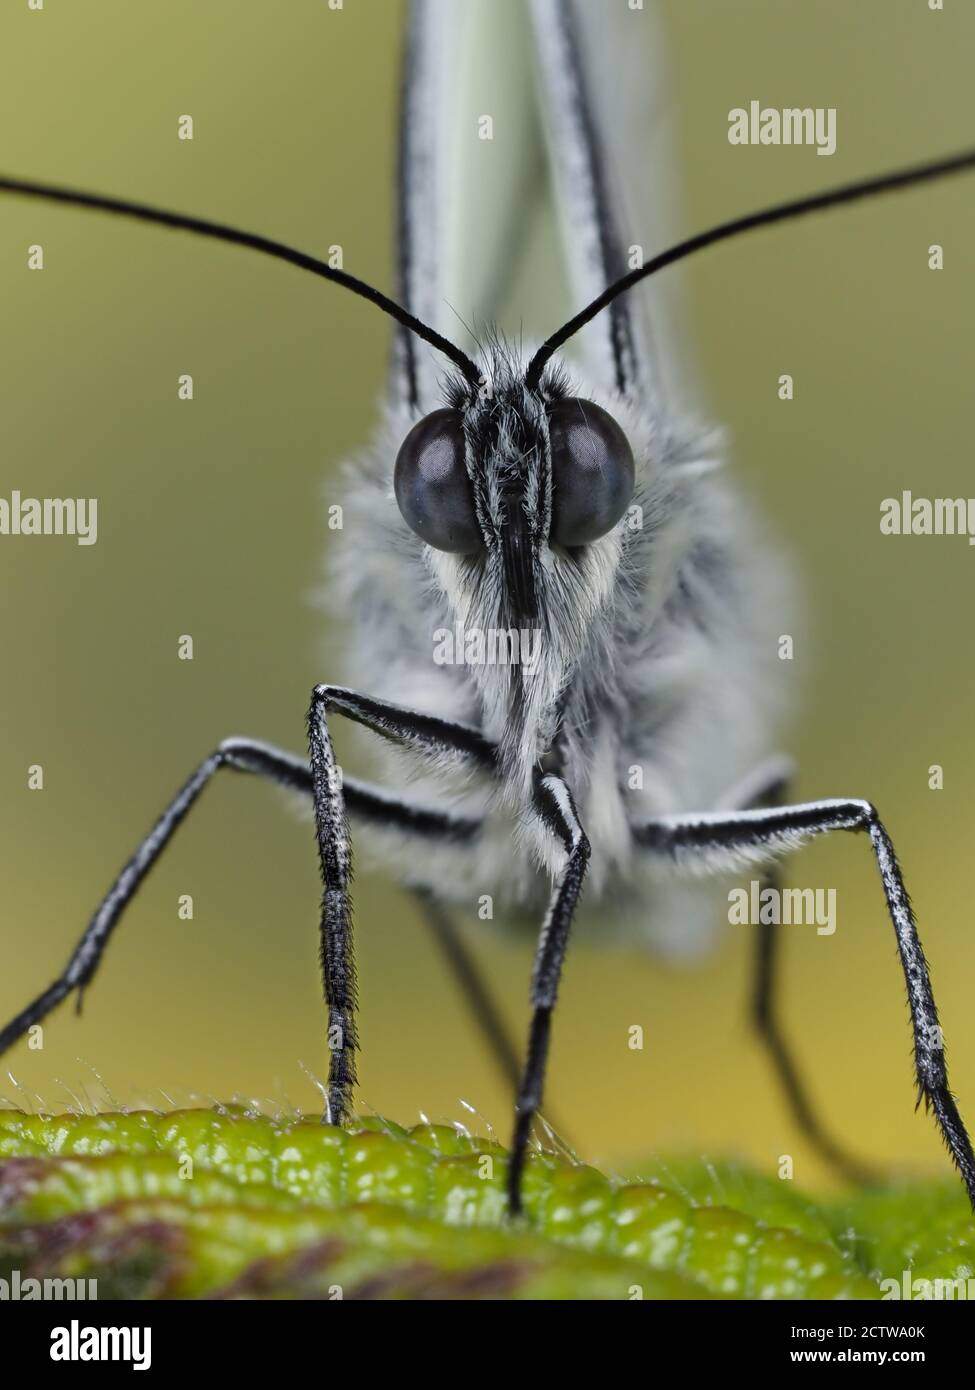 Black veined white butterfly (Aporia crataegi), stacked focus image, UK, controlled situation Stock Photo